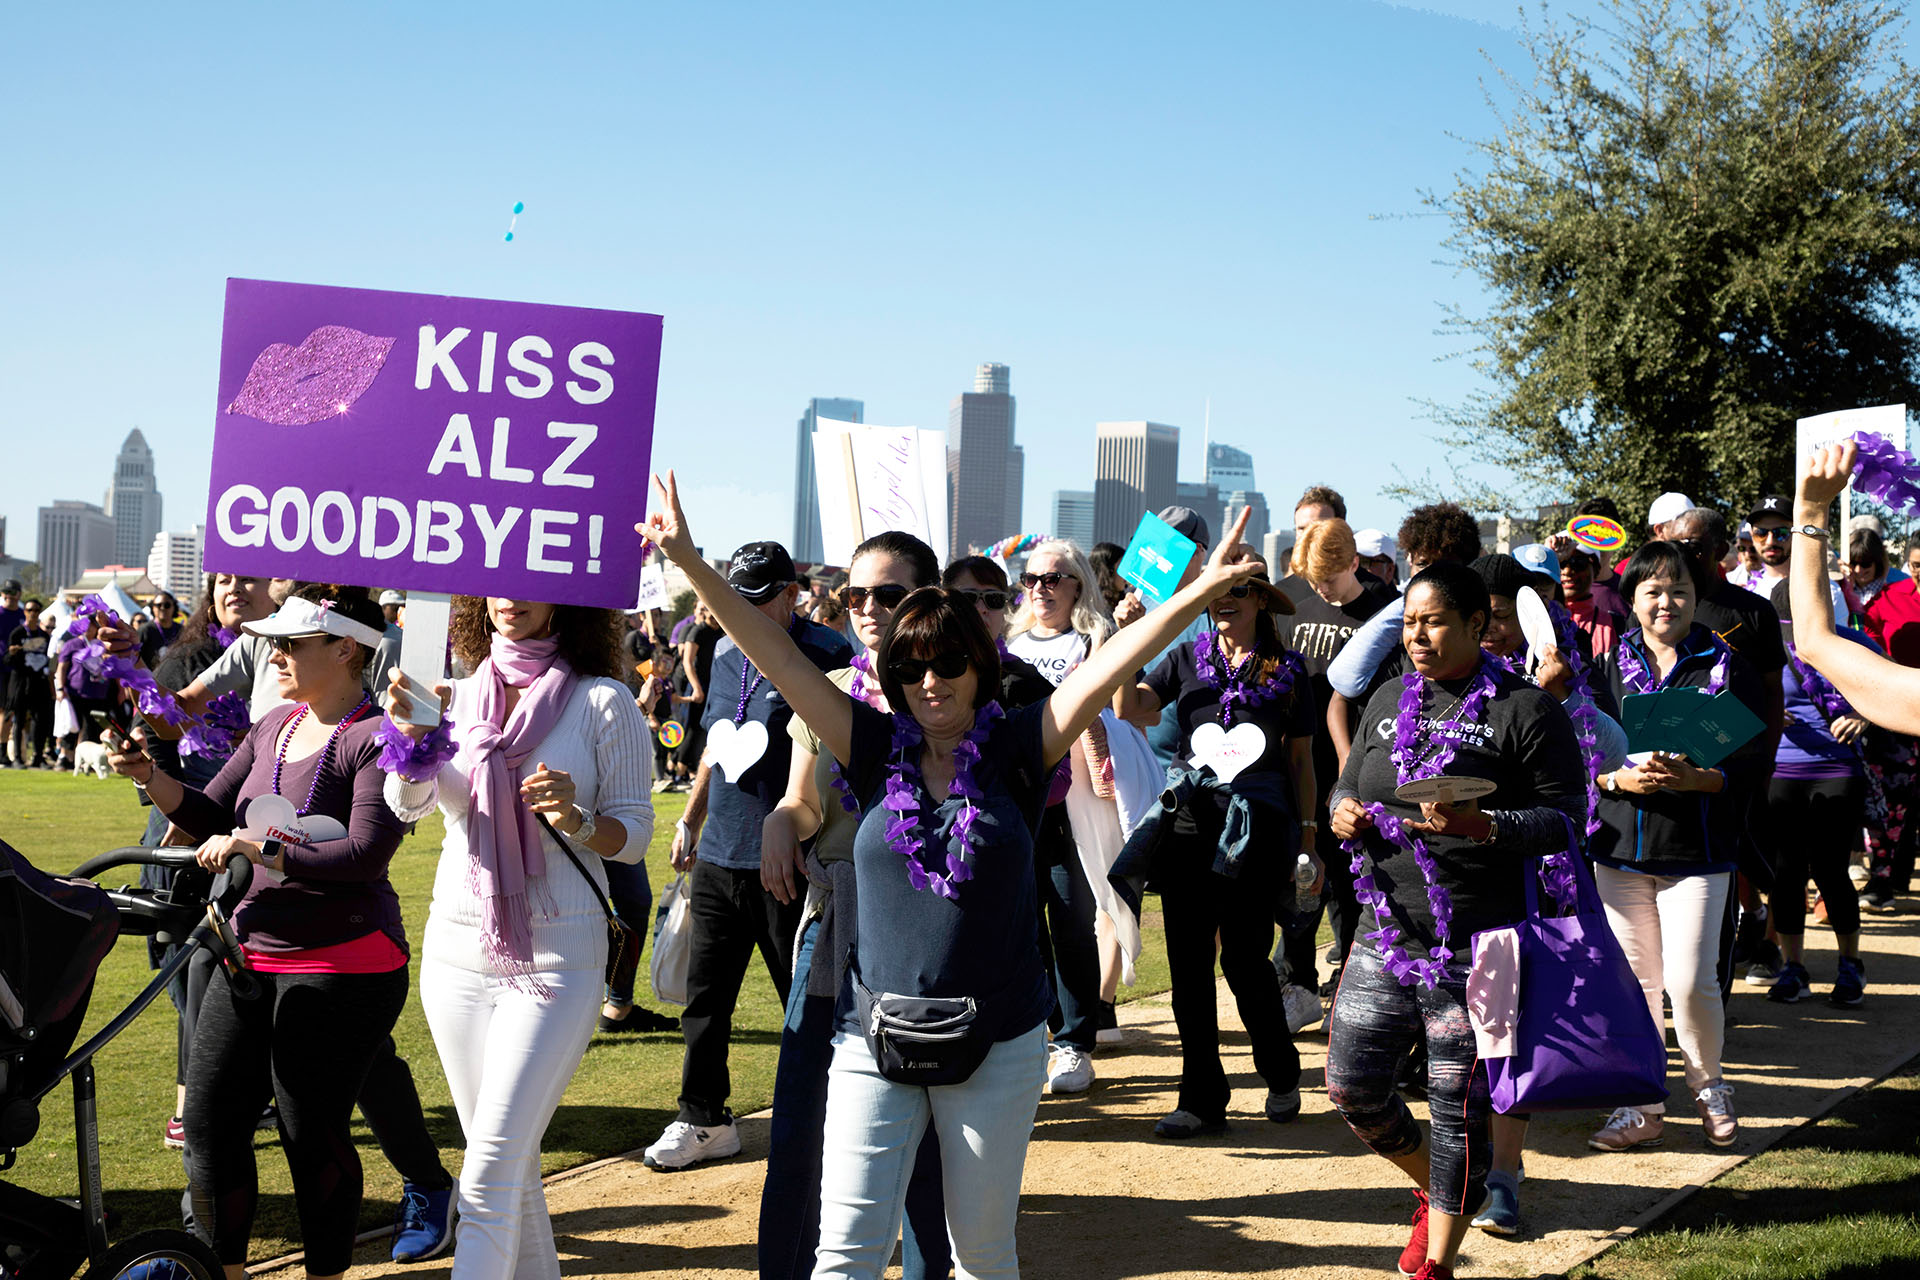 walkers holding "Kiss ALZ goodbye" sign